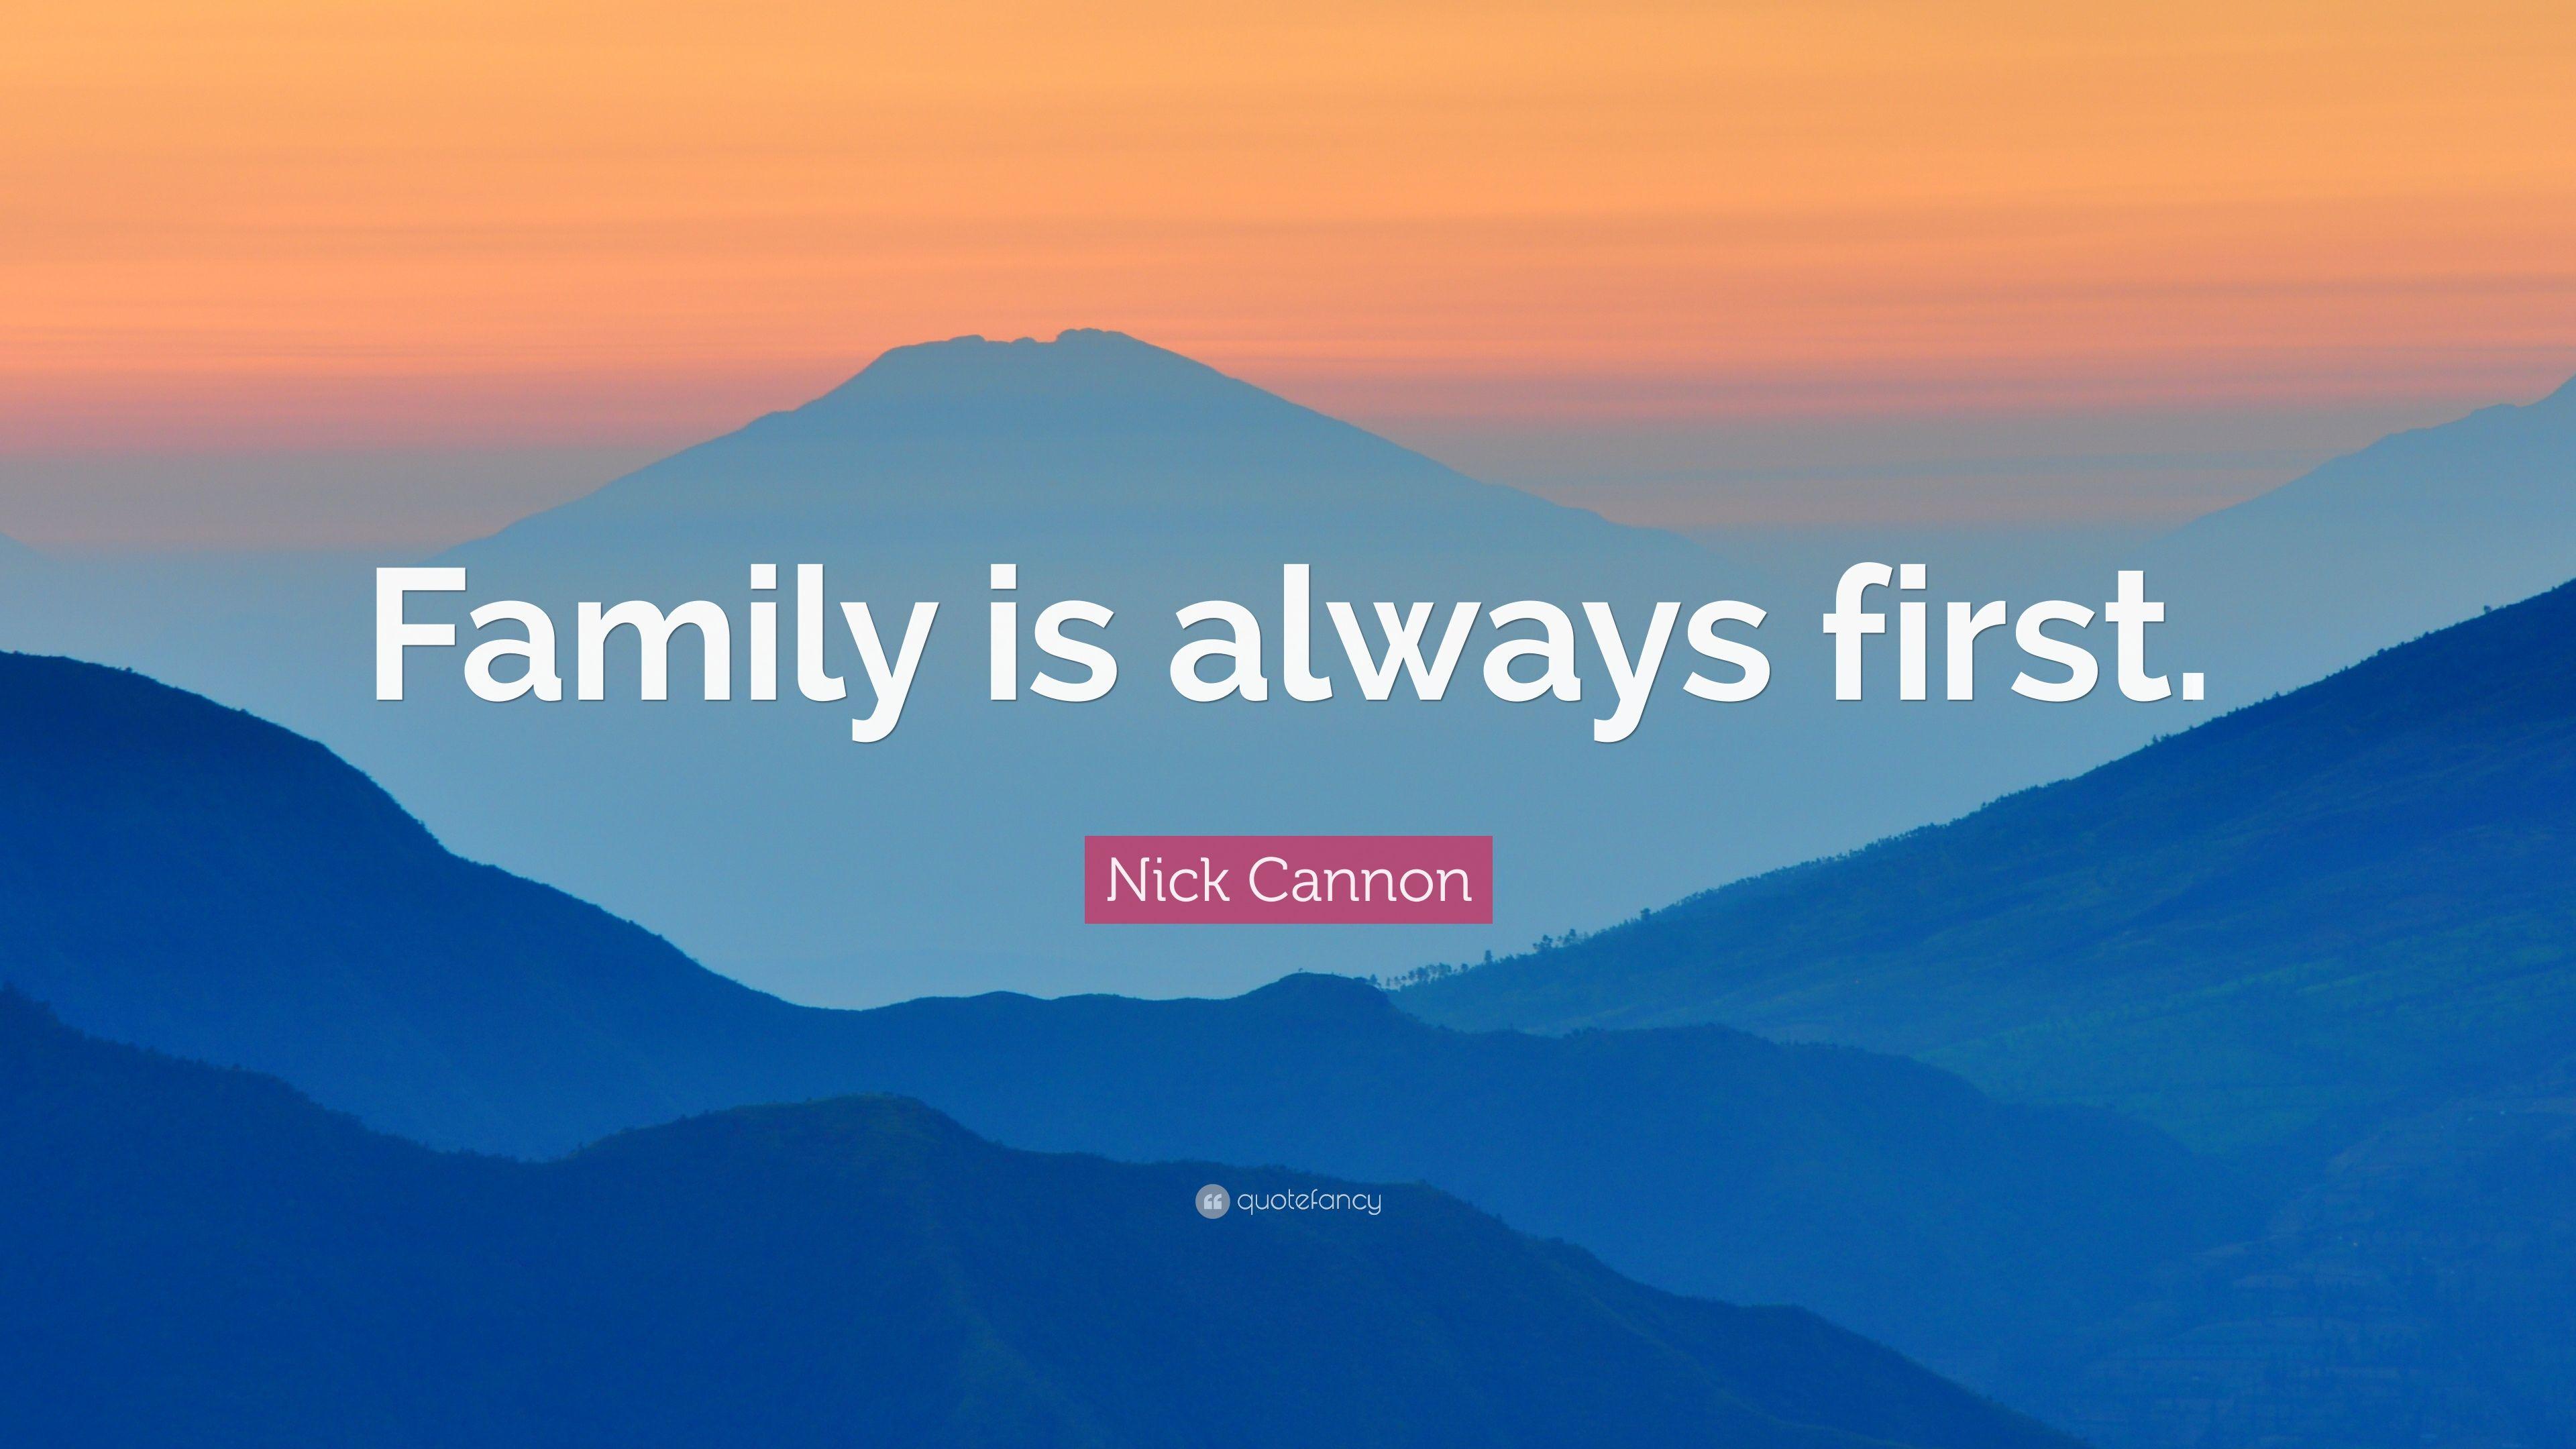 Nick Cannon Quote: “Family is always first.” (7 wallpaper)